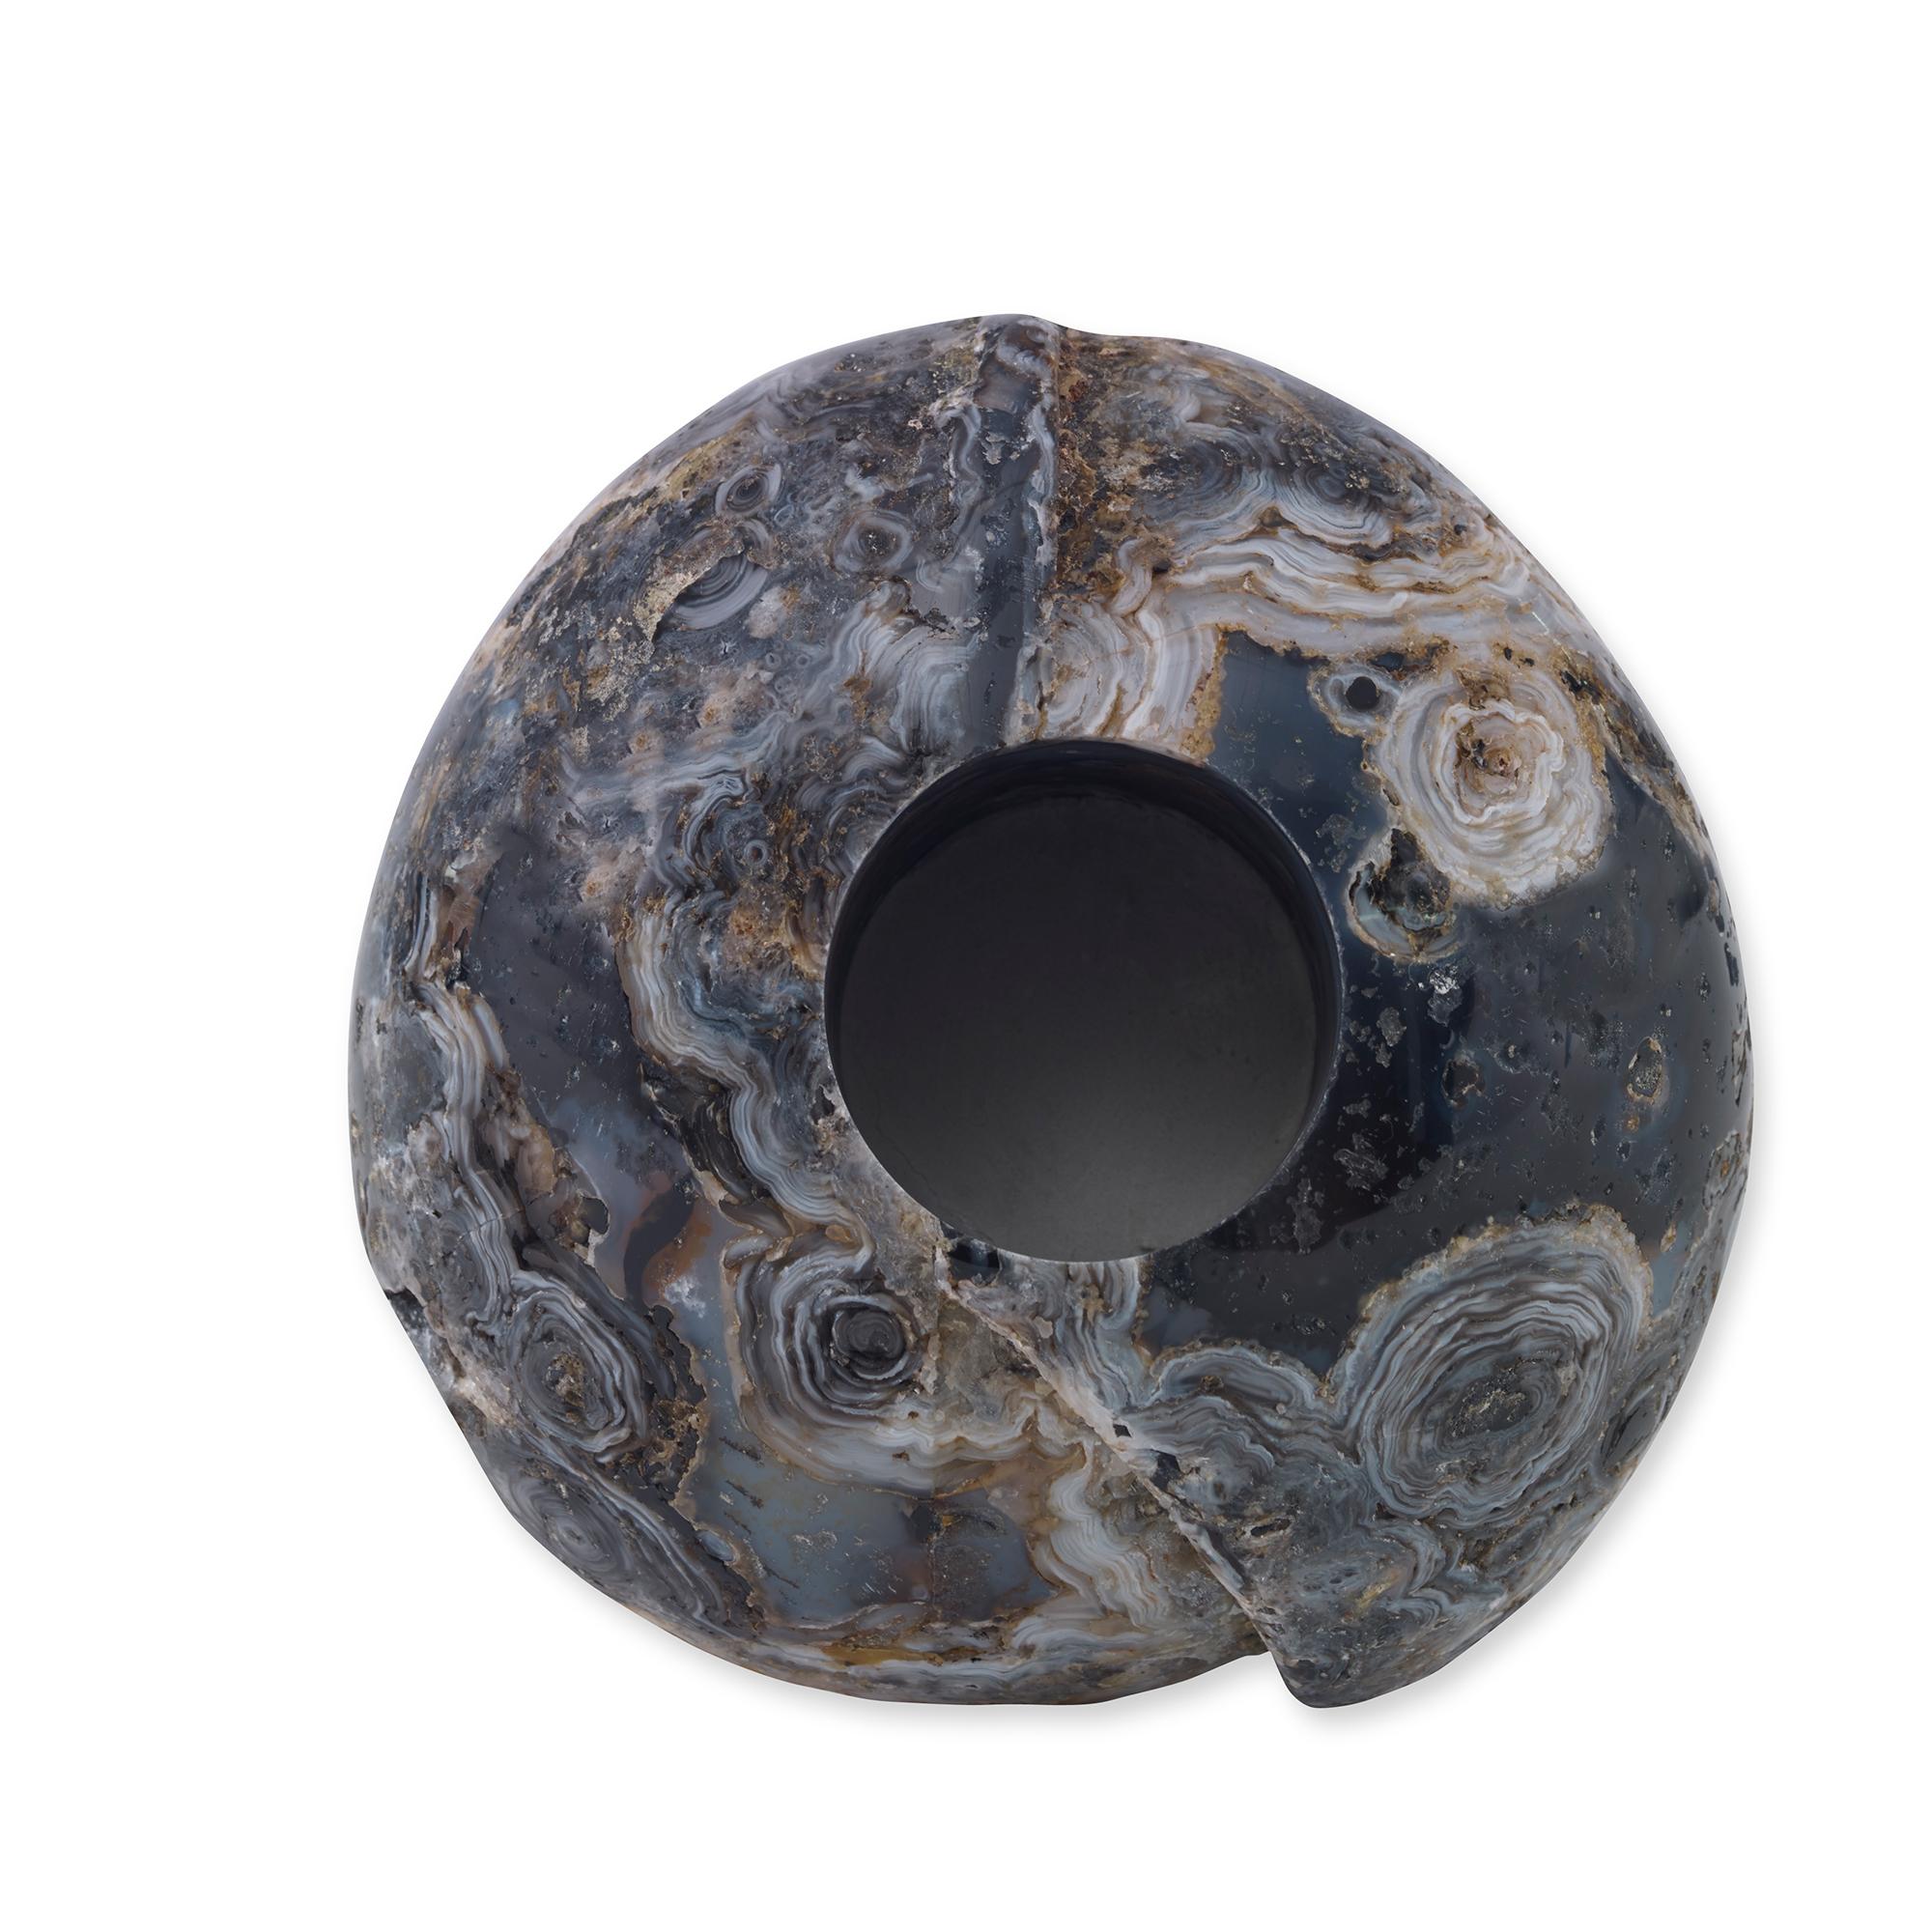 A polished, free form natural agate vase. Due to the natural material, variation in size, shape, and color is to be expected.
      